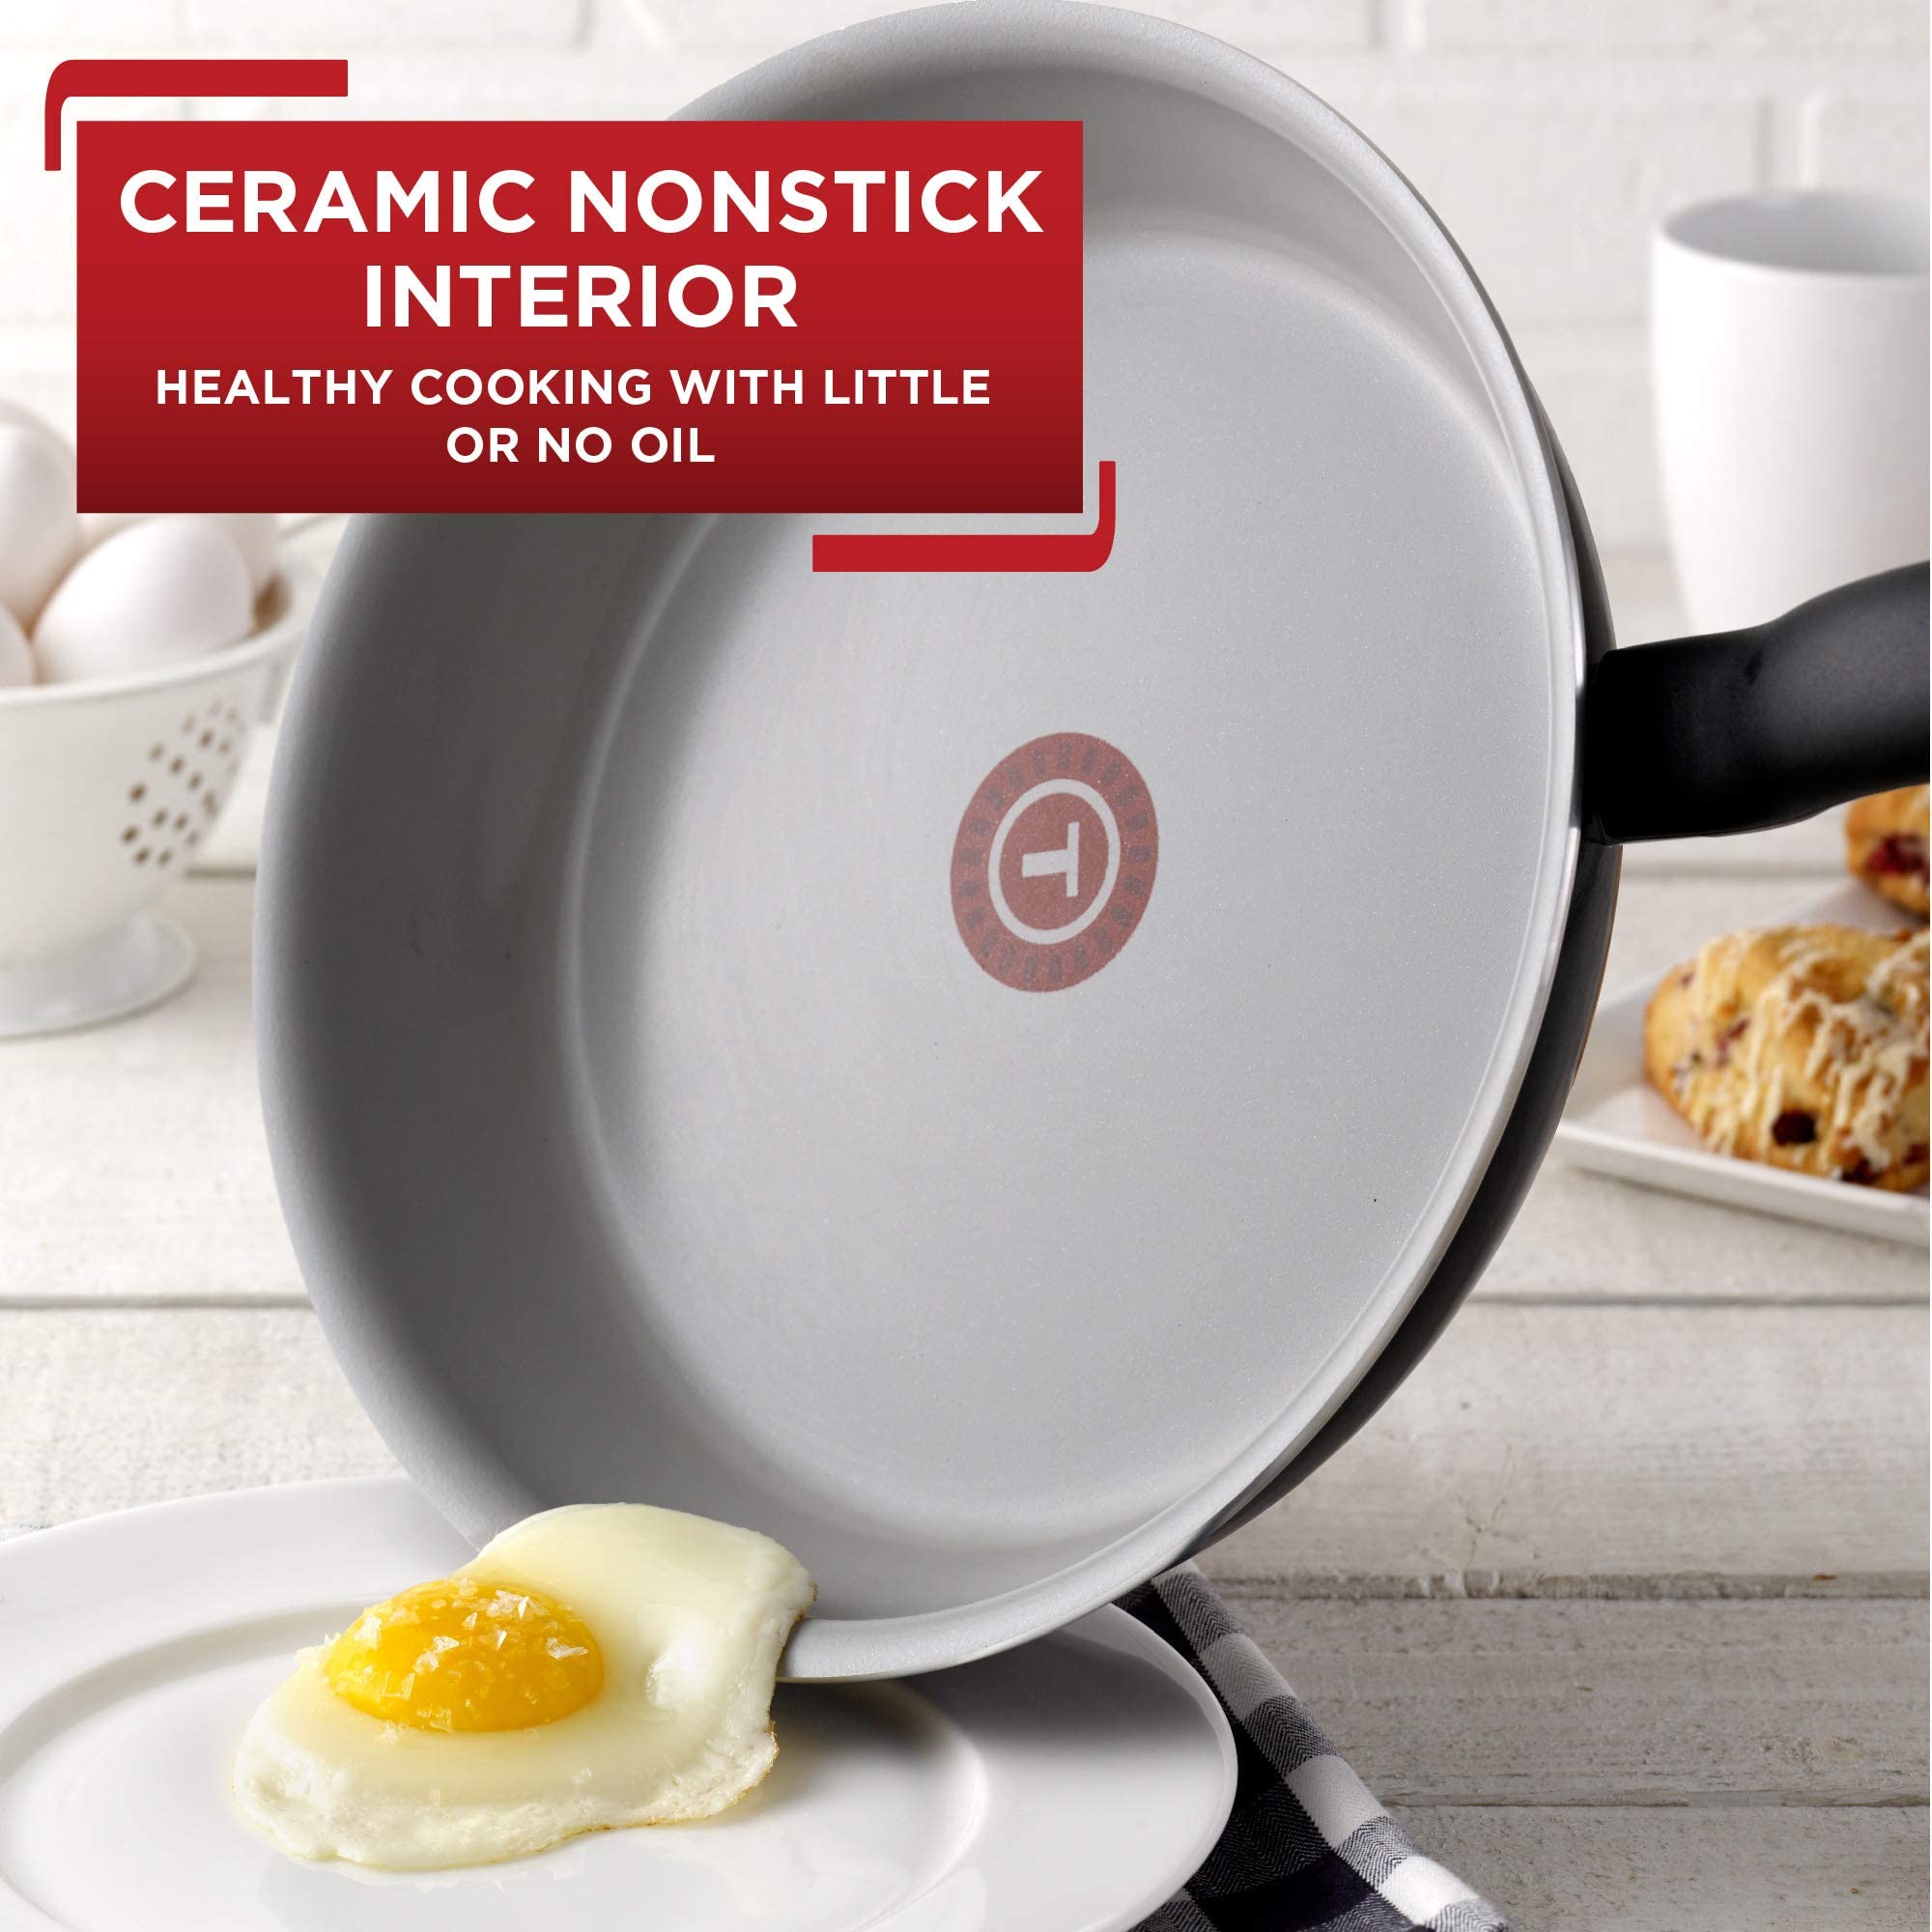 Can Ceramic Go in Oven: Oven-Safe Ceramics - Clarifying the Oven Compatibility of Ceramic Cookware